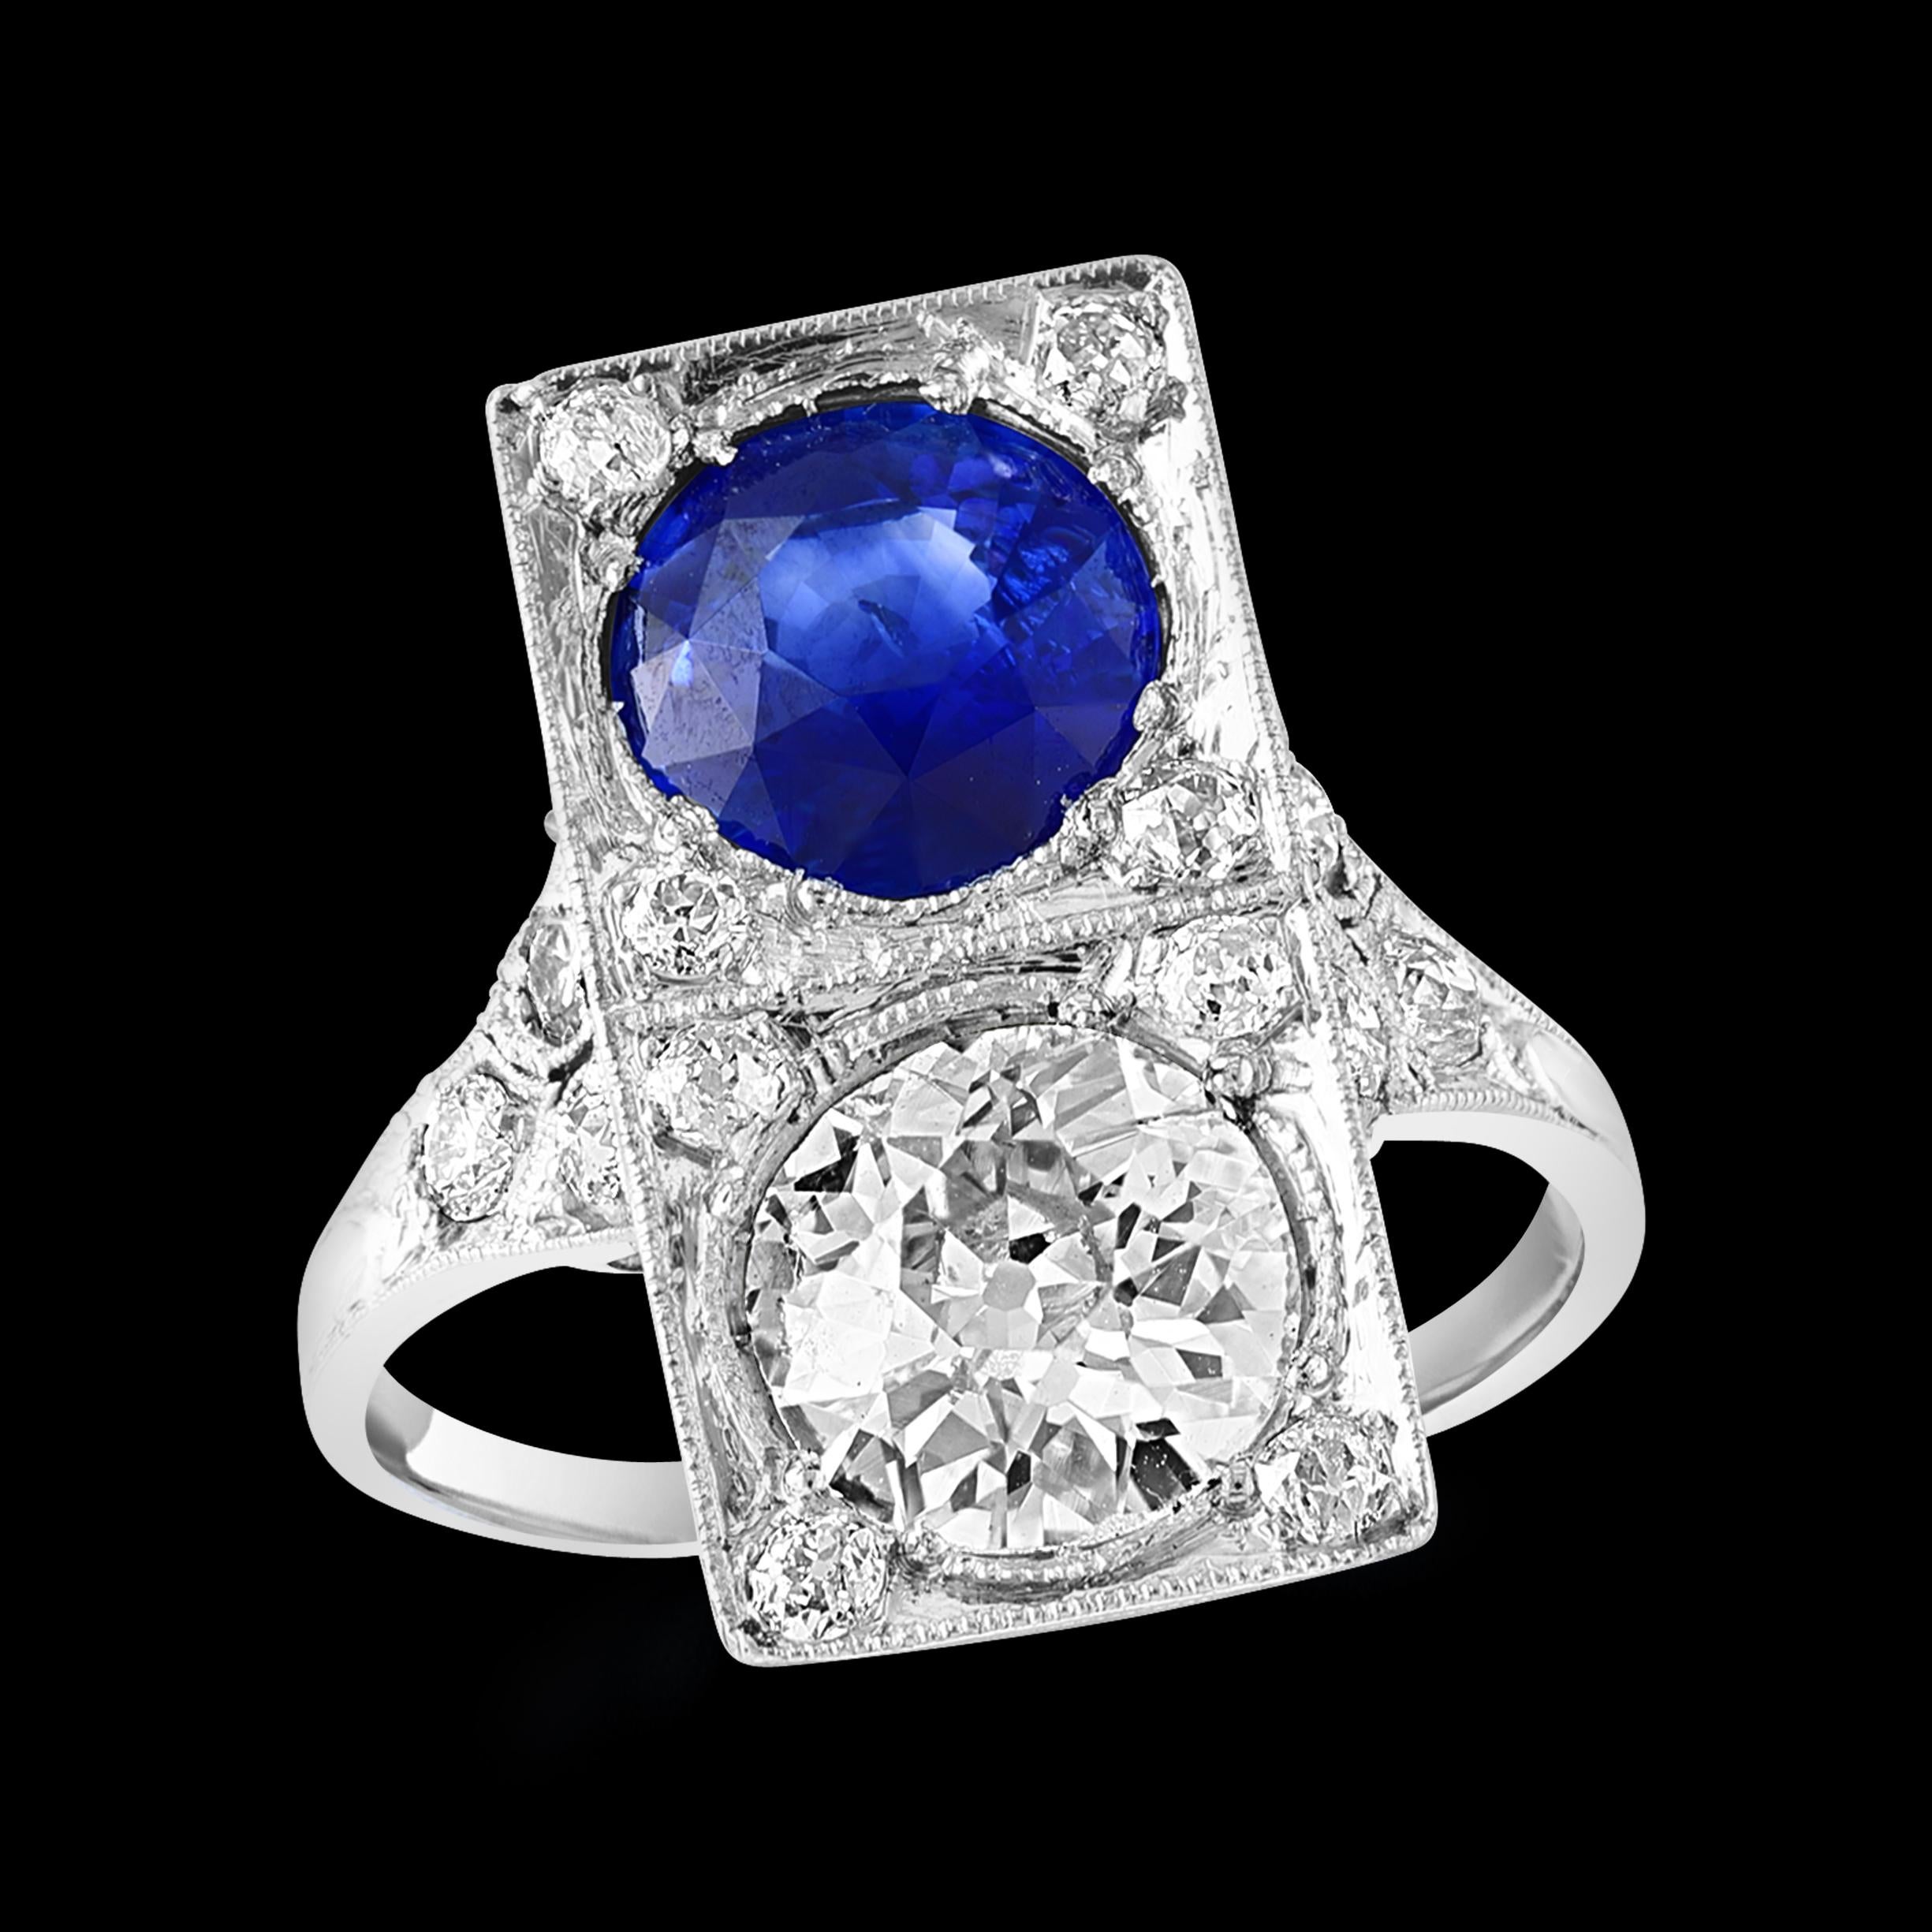 Approximately 2.5 Carat  Ceylon  Blue Sapphire GIA CERTIFIED & Diamond Platinum Cocktail Ring
2.5 Carat of blue Sapphire. This is an estate piece and stone was not taken  out to weigh the actual weight . The estimated weight is my measurement